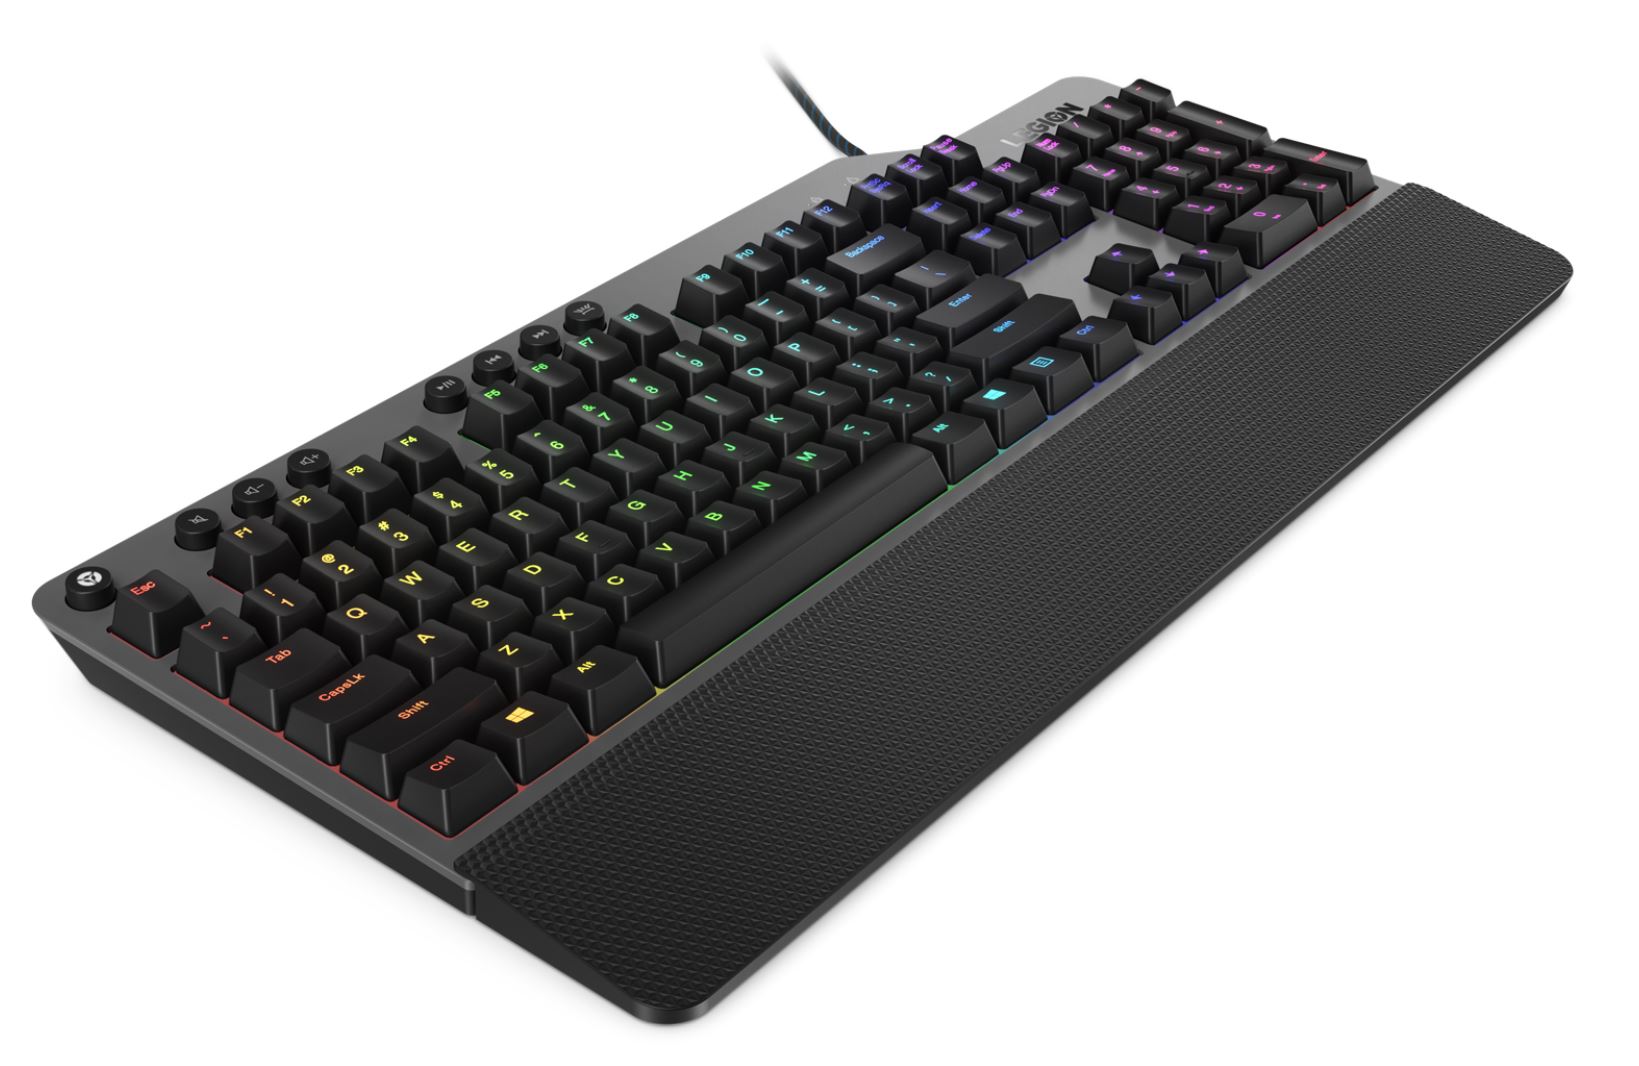 Lenovo Legion K500 RGB Mechanical Gaming Keyboard - Overview and ...